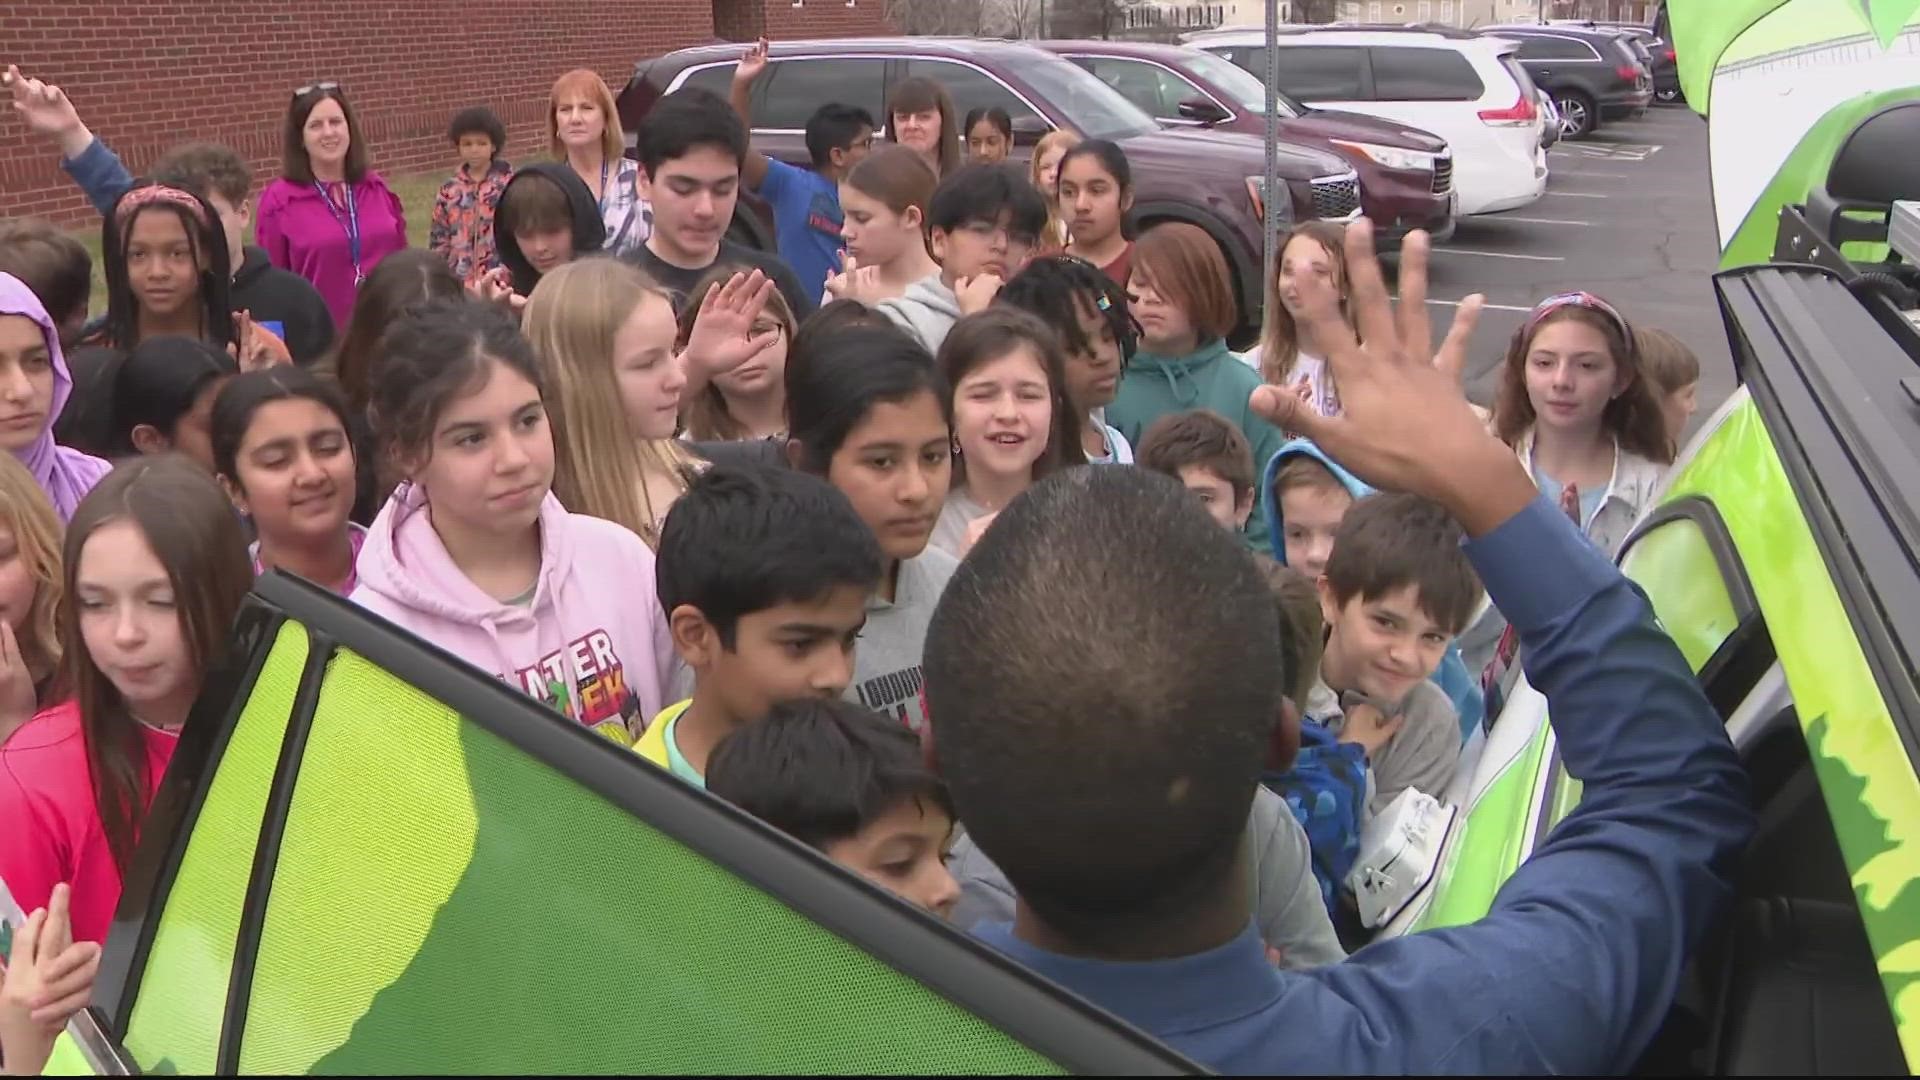 METEOROLOGIST CHESTER LAMPKIN BROUGHT ECO9 TO LEGACY ELEMENTARY SCHOOL IN ASHBURN, VIRGINIA.